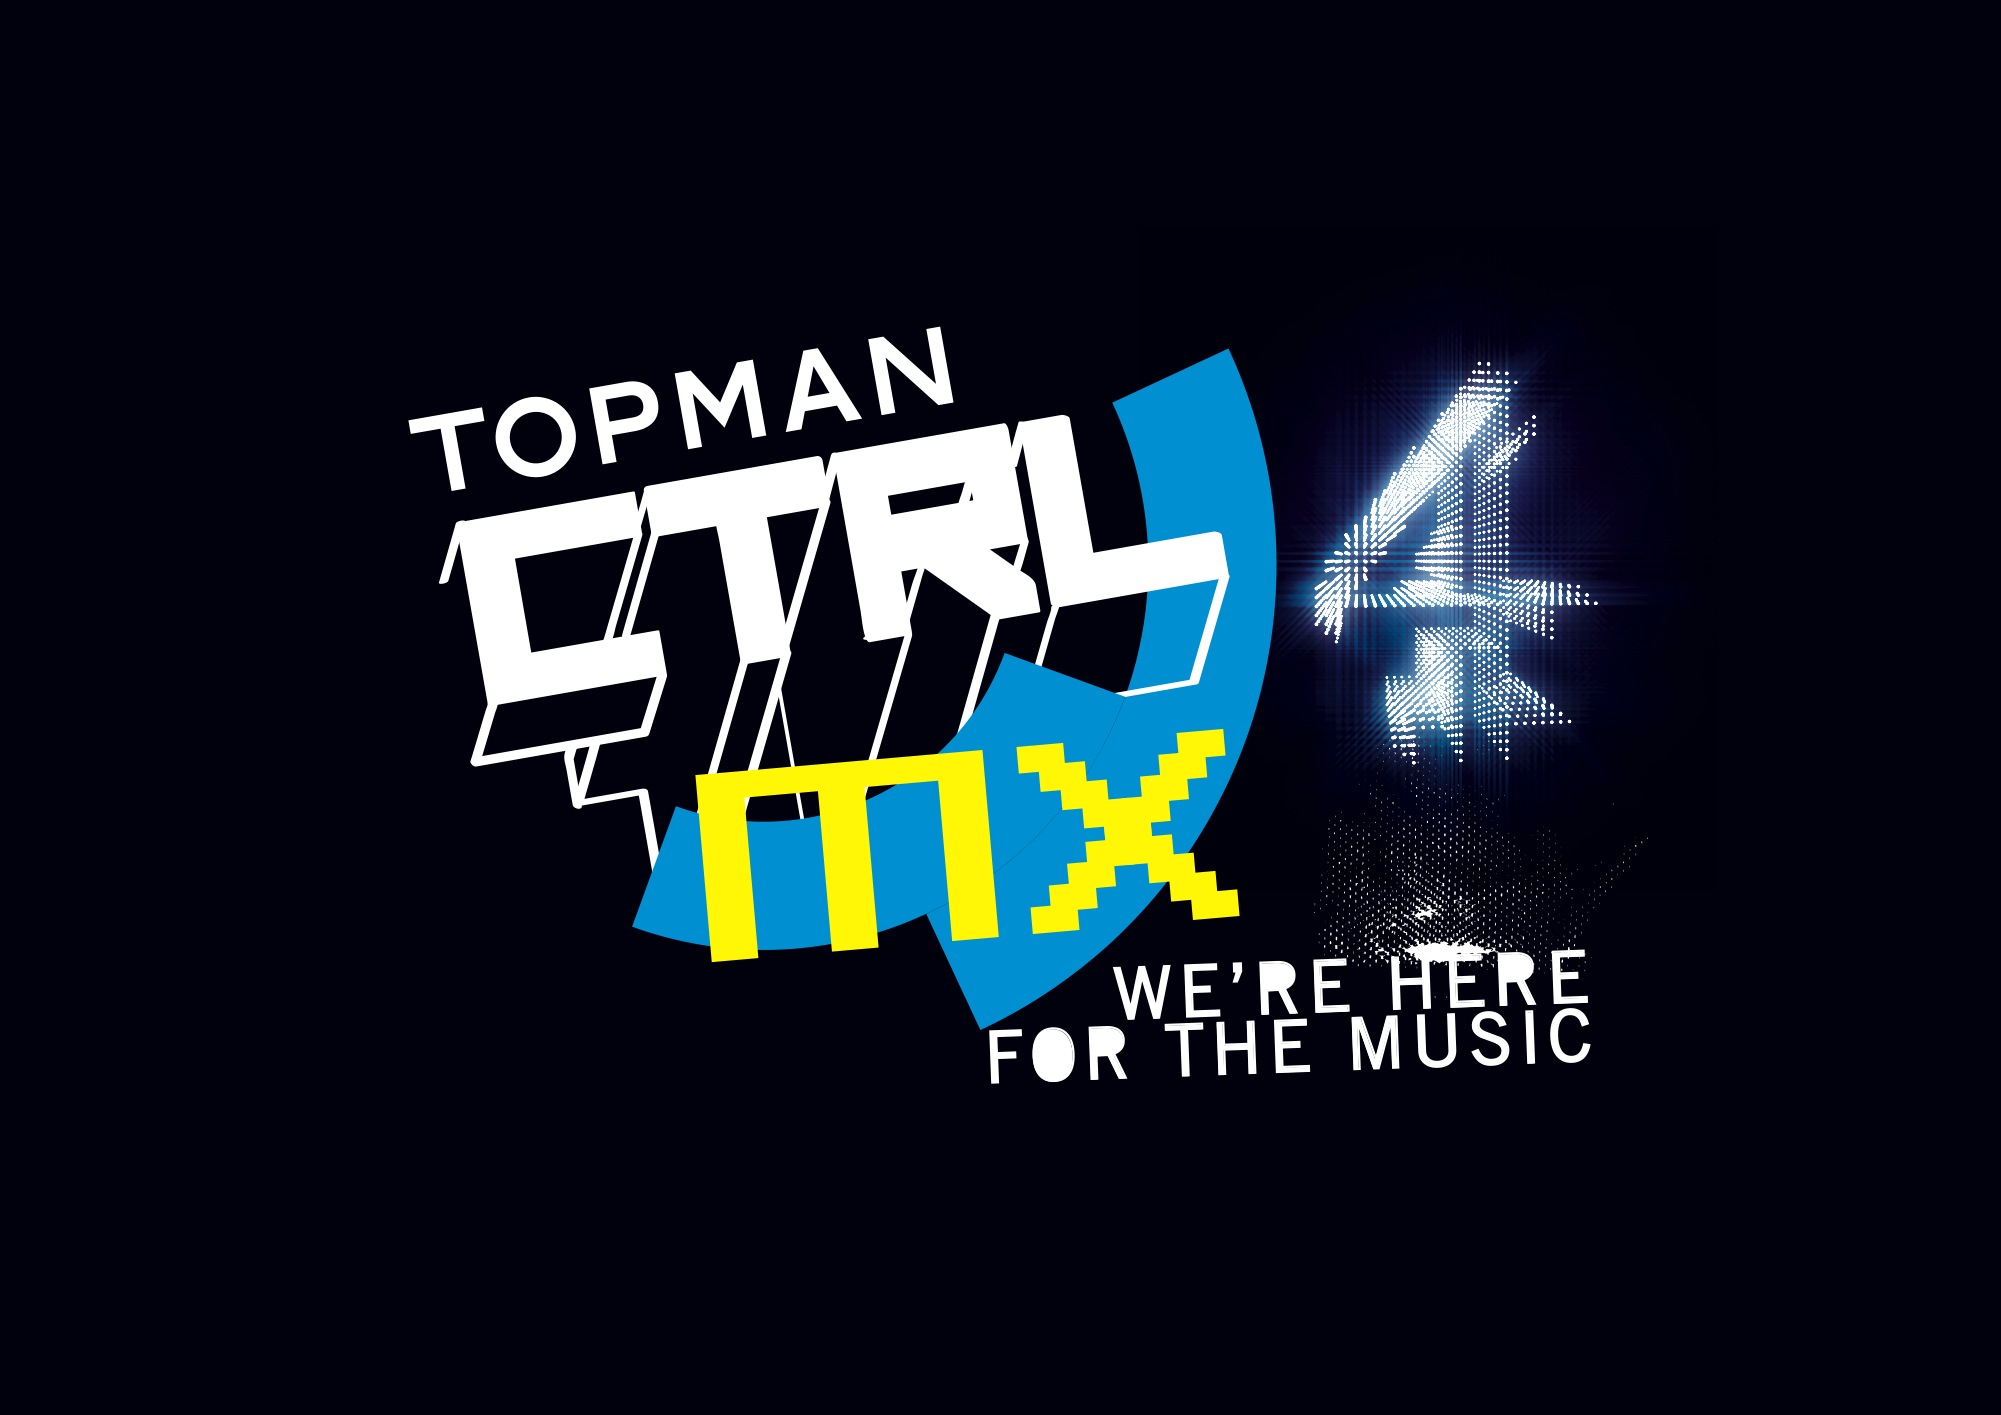 Win Two Tickets To The Filming Of Mark Ronson's Topman CTRL MX For Channel 4